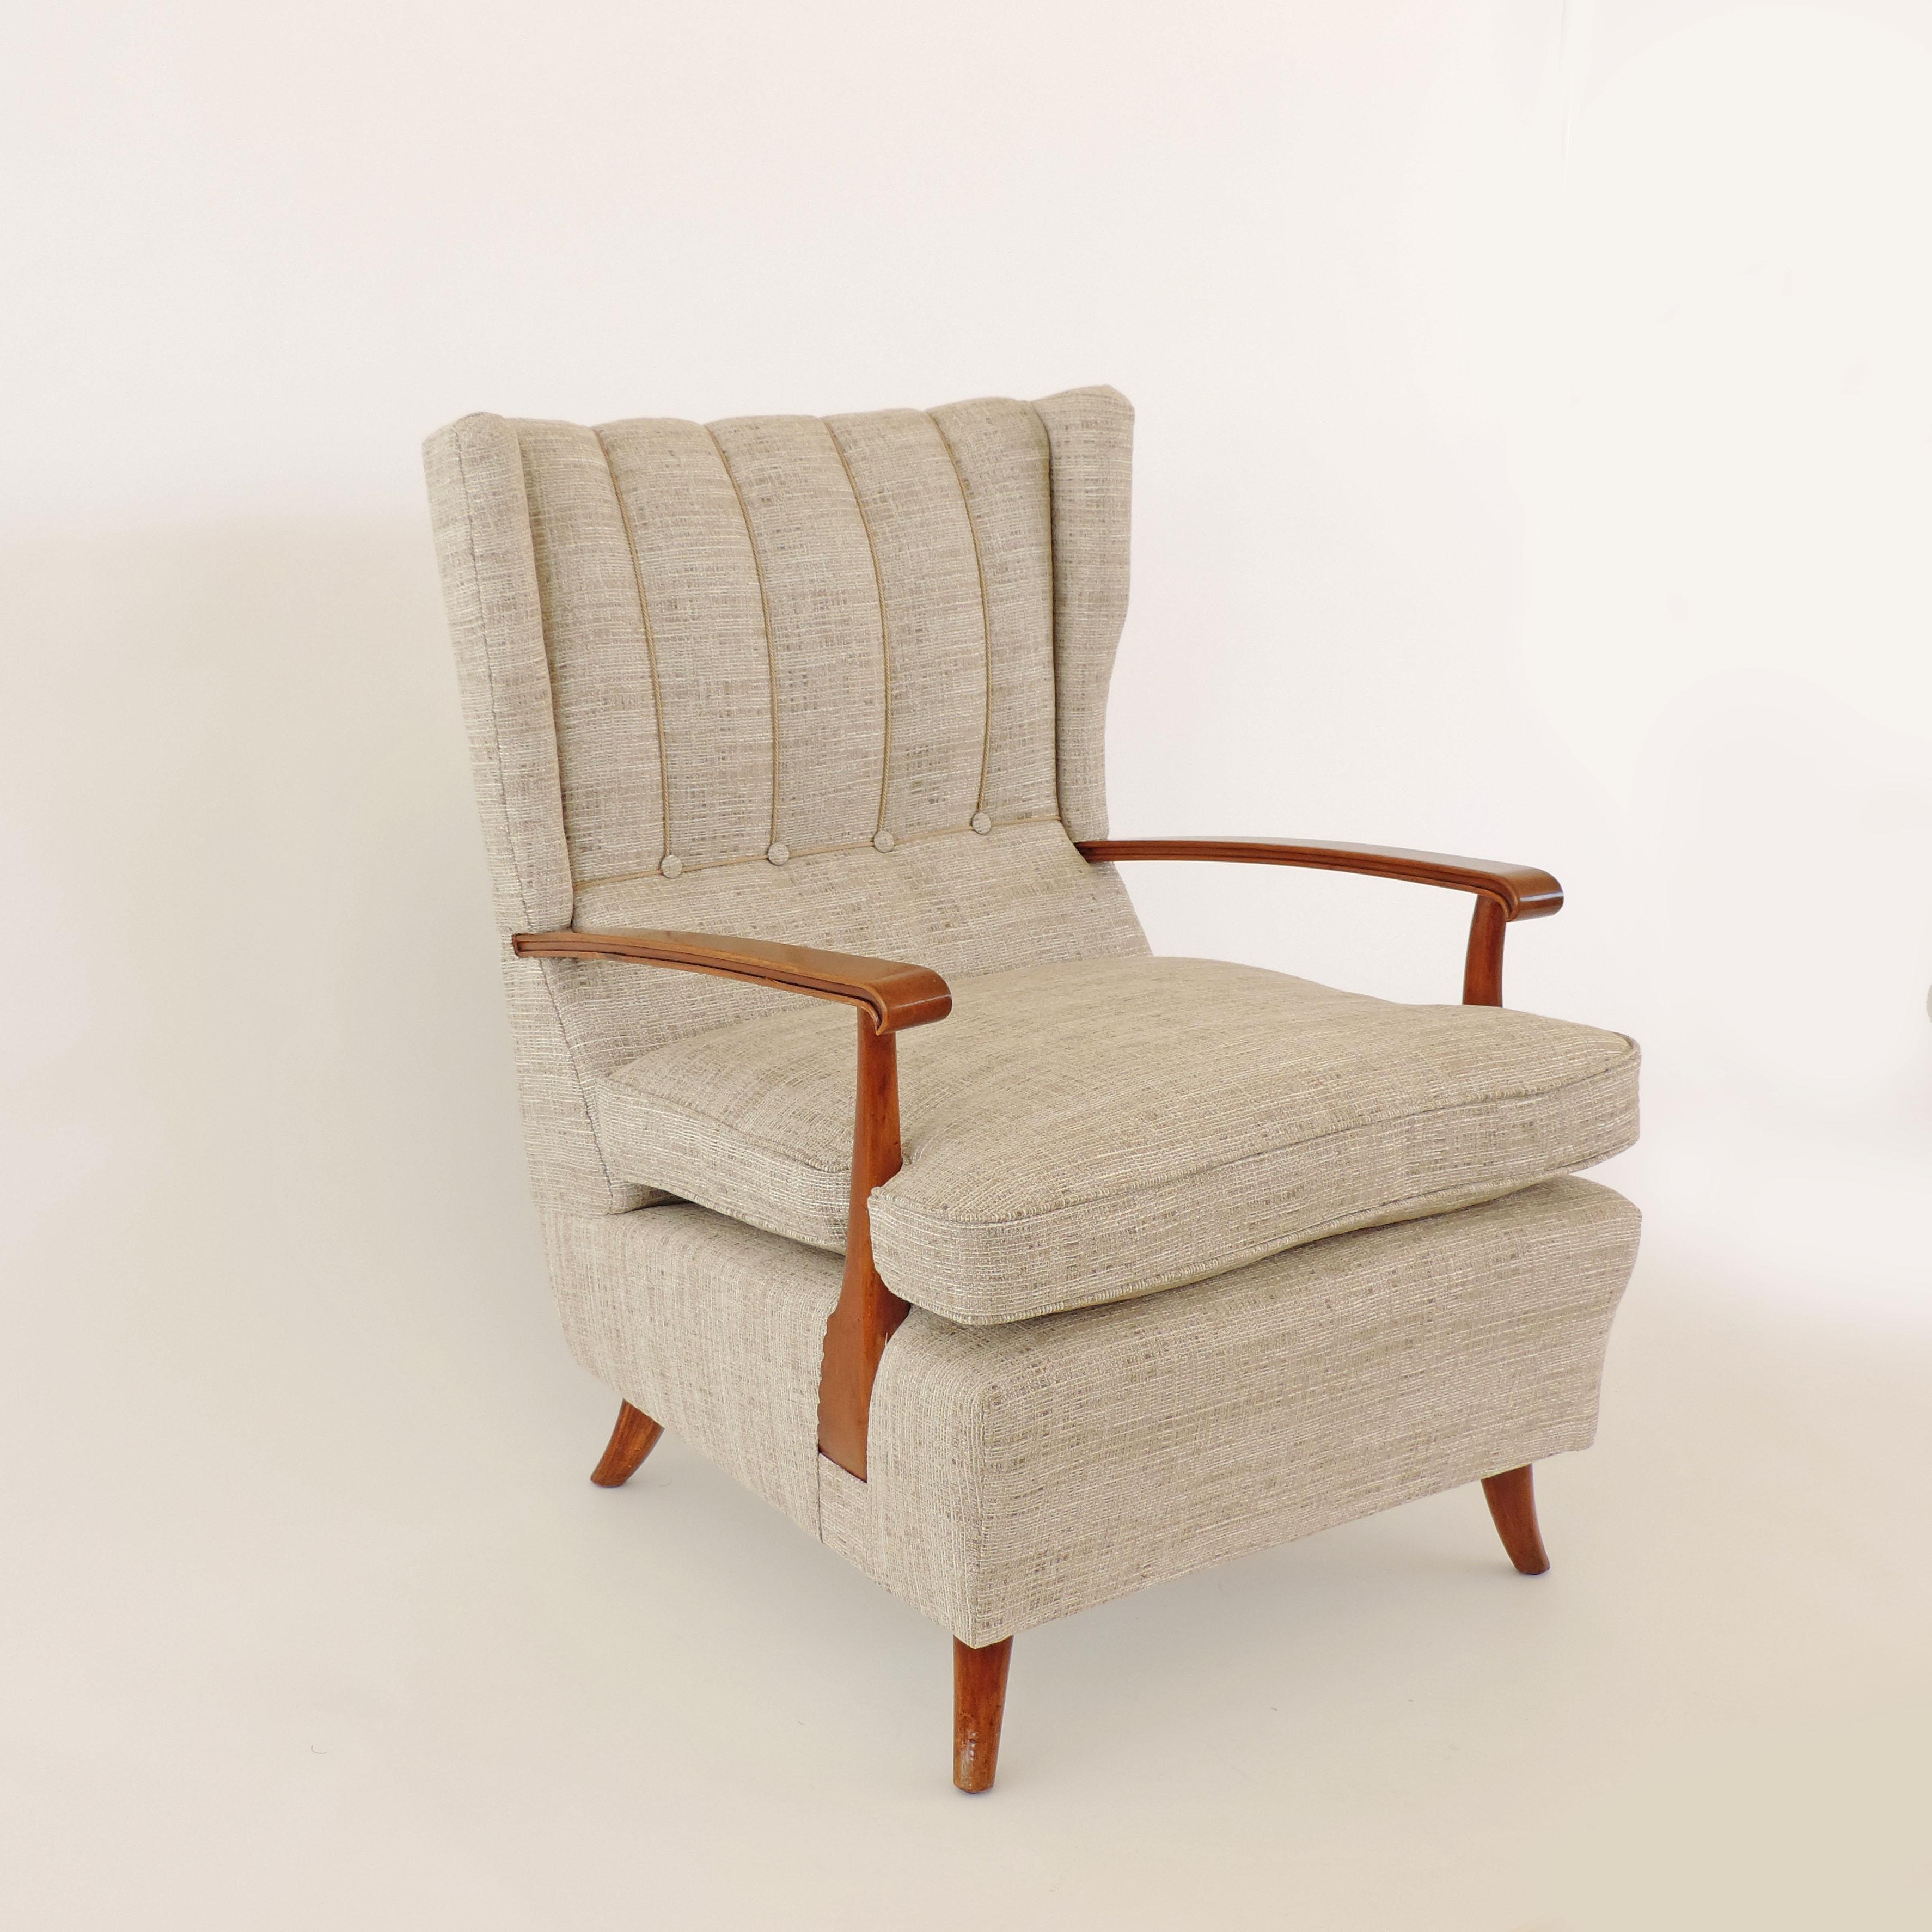 Spectacular Pair of Paolo Buffa Armchairs, Italy, 1940s For Sale 2